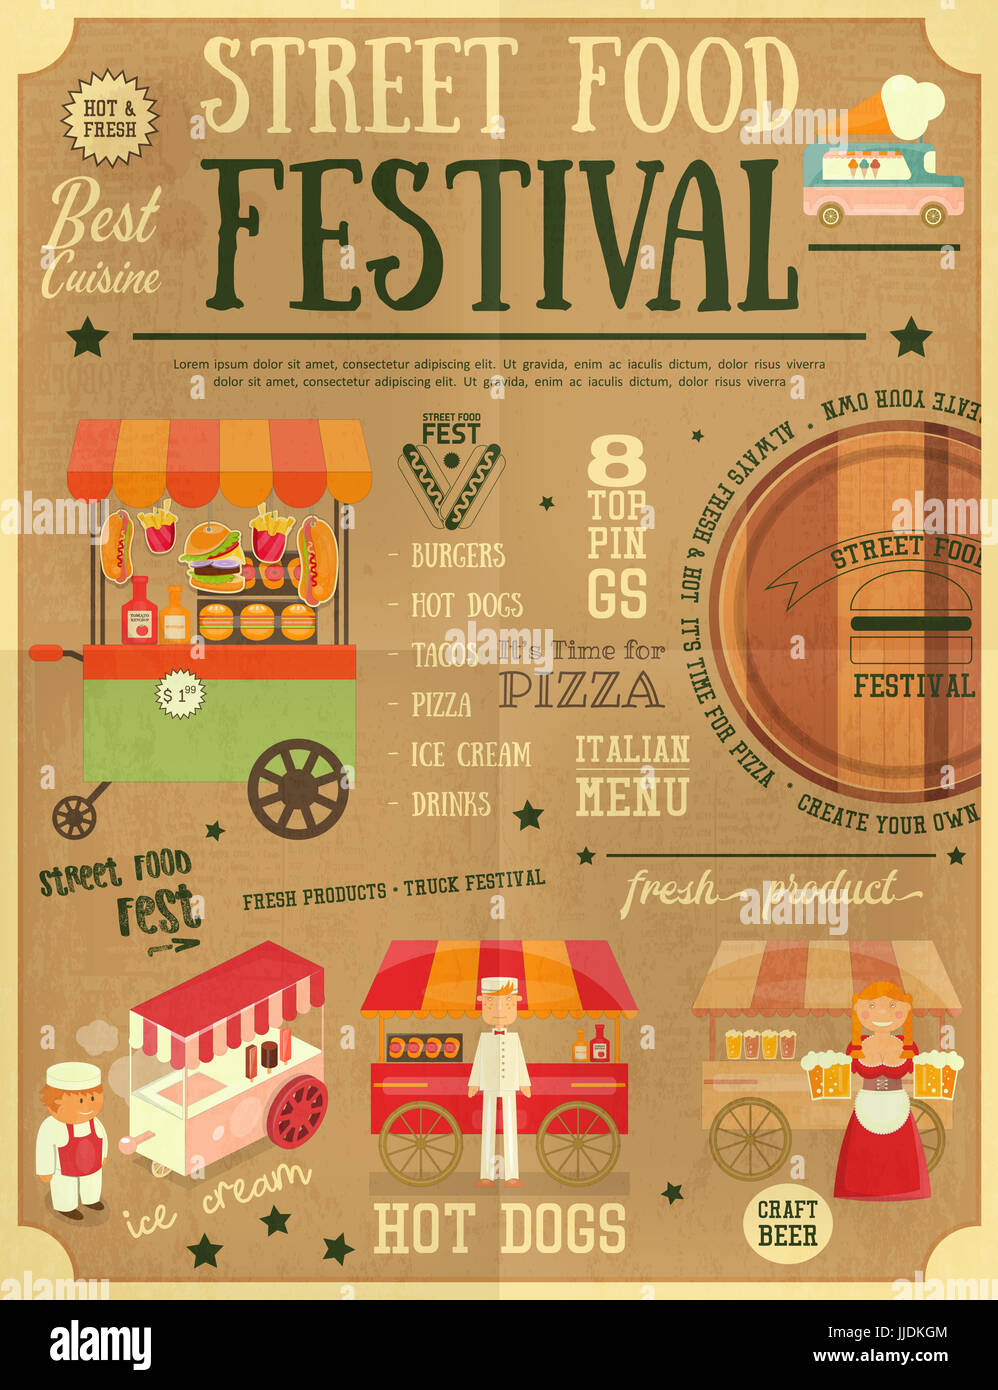 street food and fast food truck festival on vintage retro poster template JJDKGM